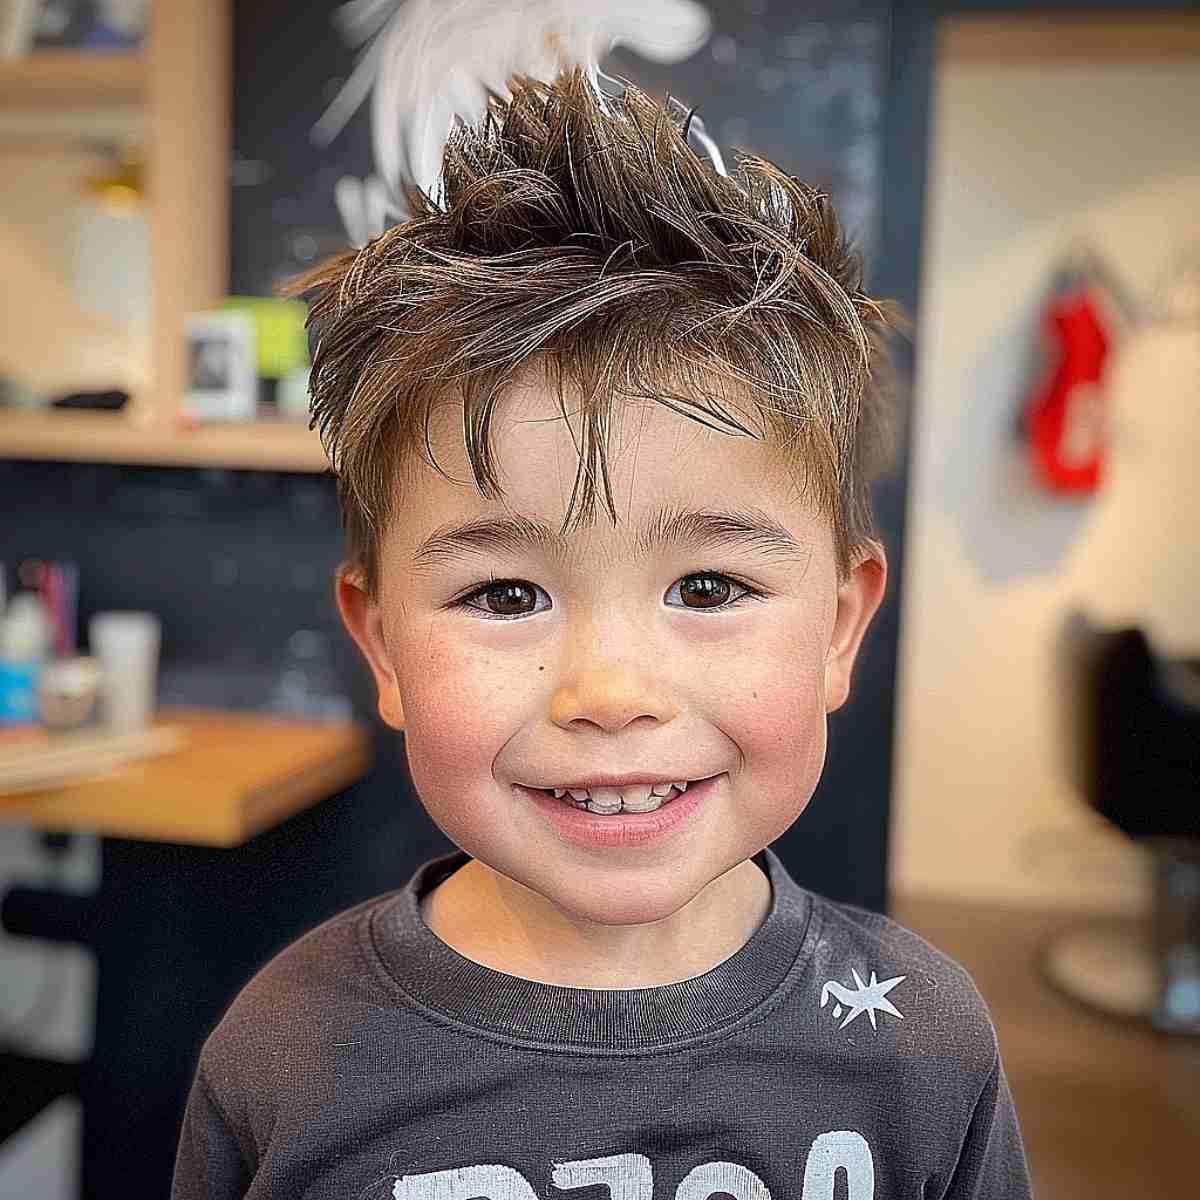 Textured haircut for toddler boy